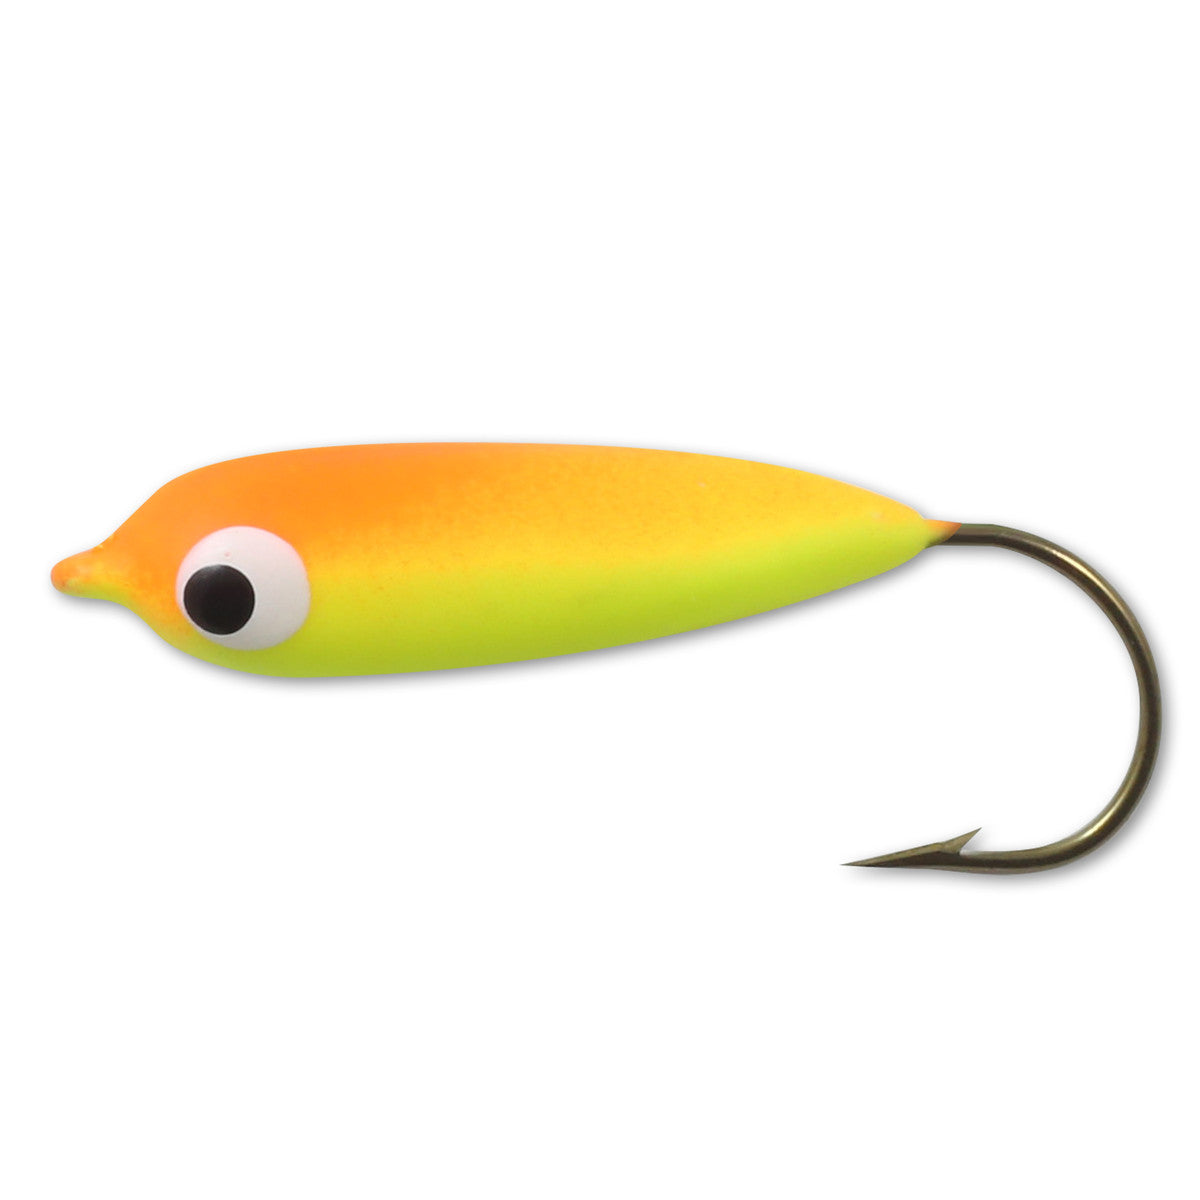 Northland Gum-Drop Floater – Tall Tales Bait & Tackle